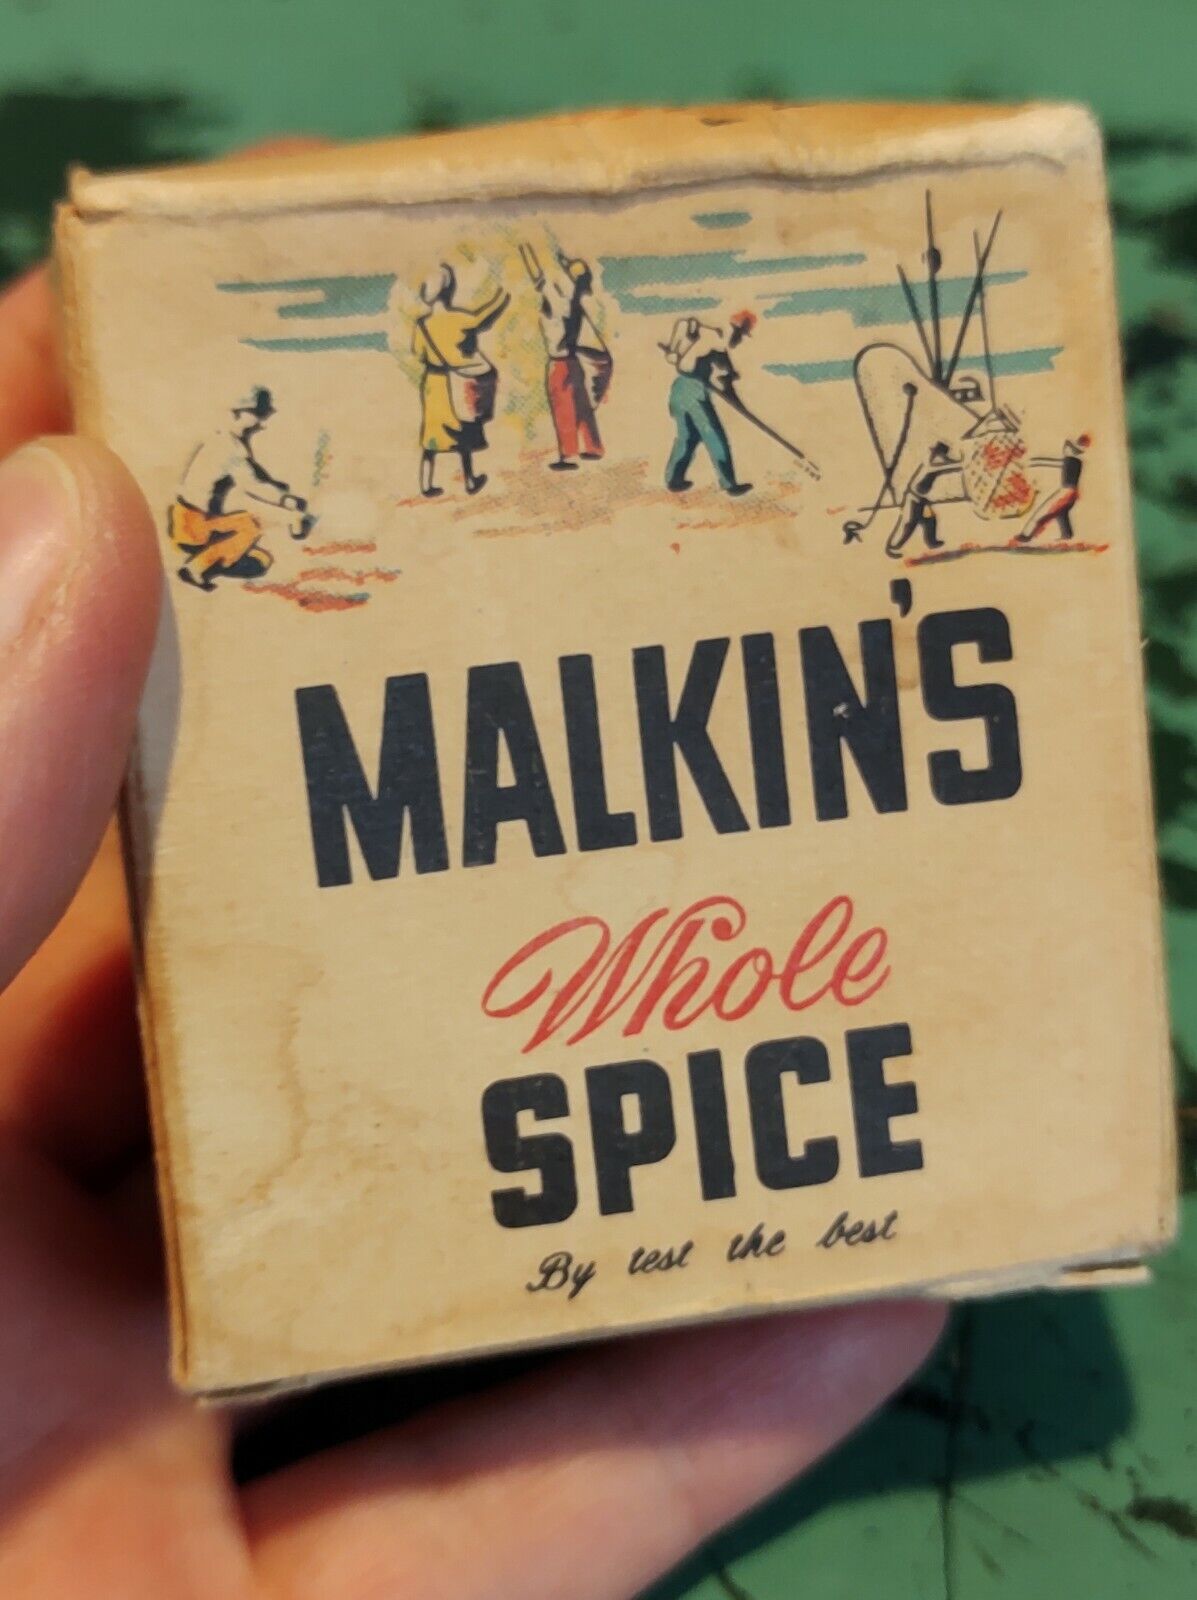 Vintage Malkin\'s Whole Spice Caraway Cardboard Box With Some Contents RARE